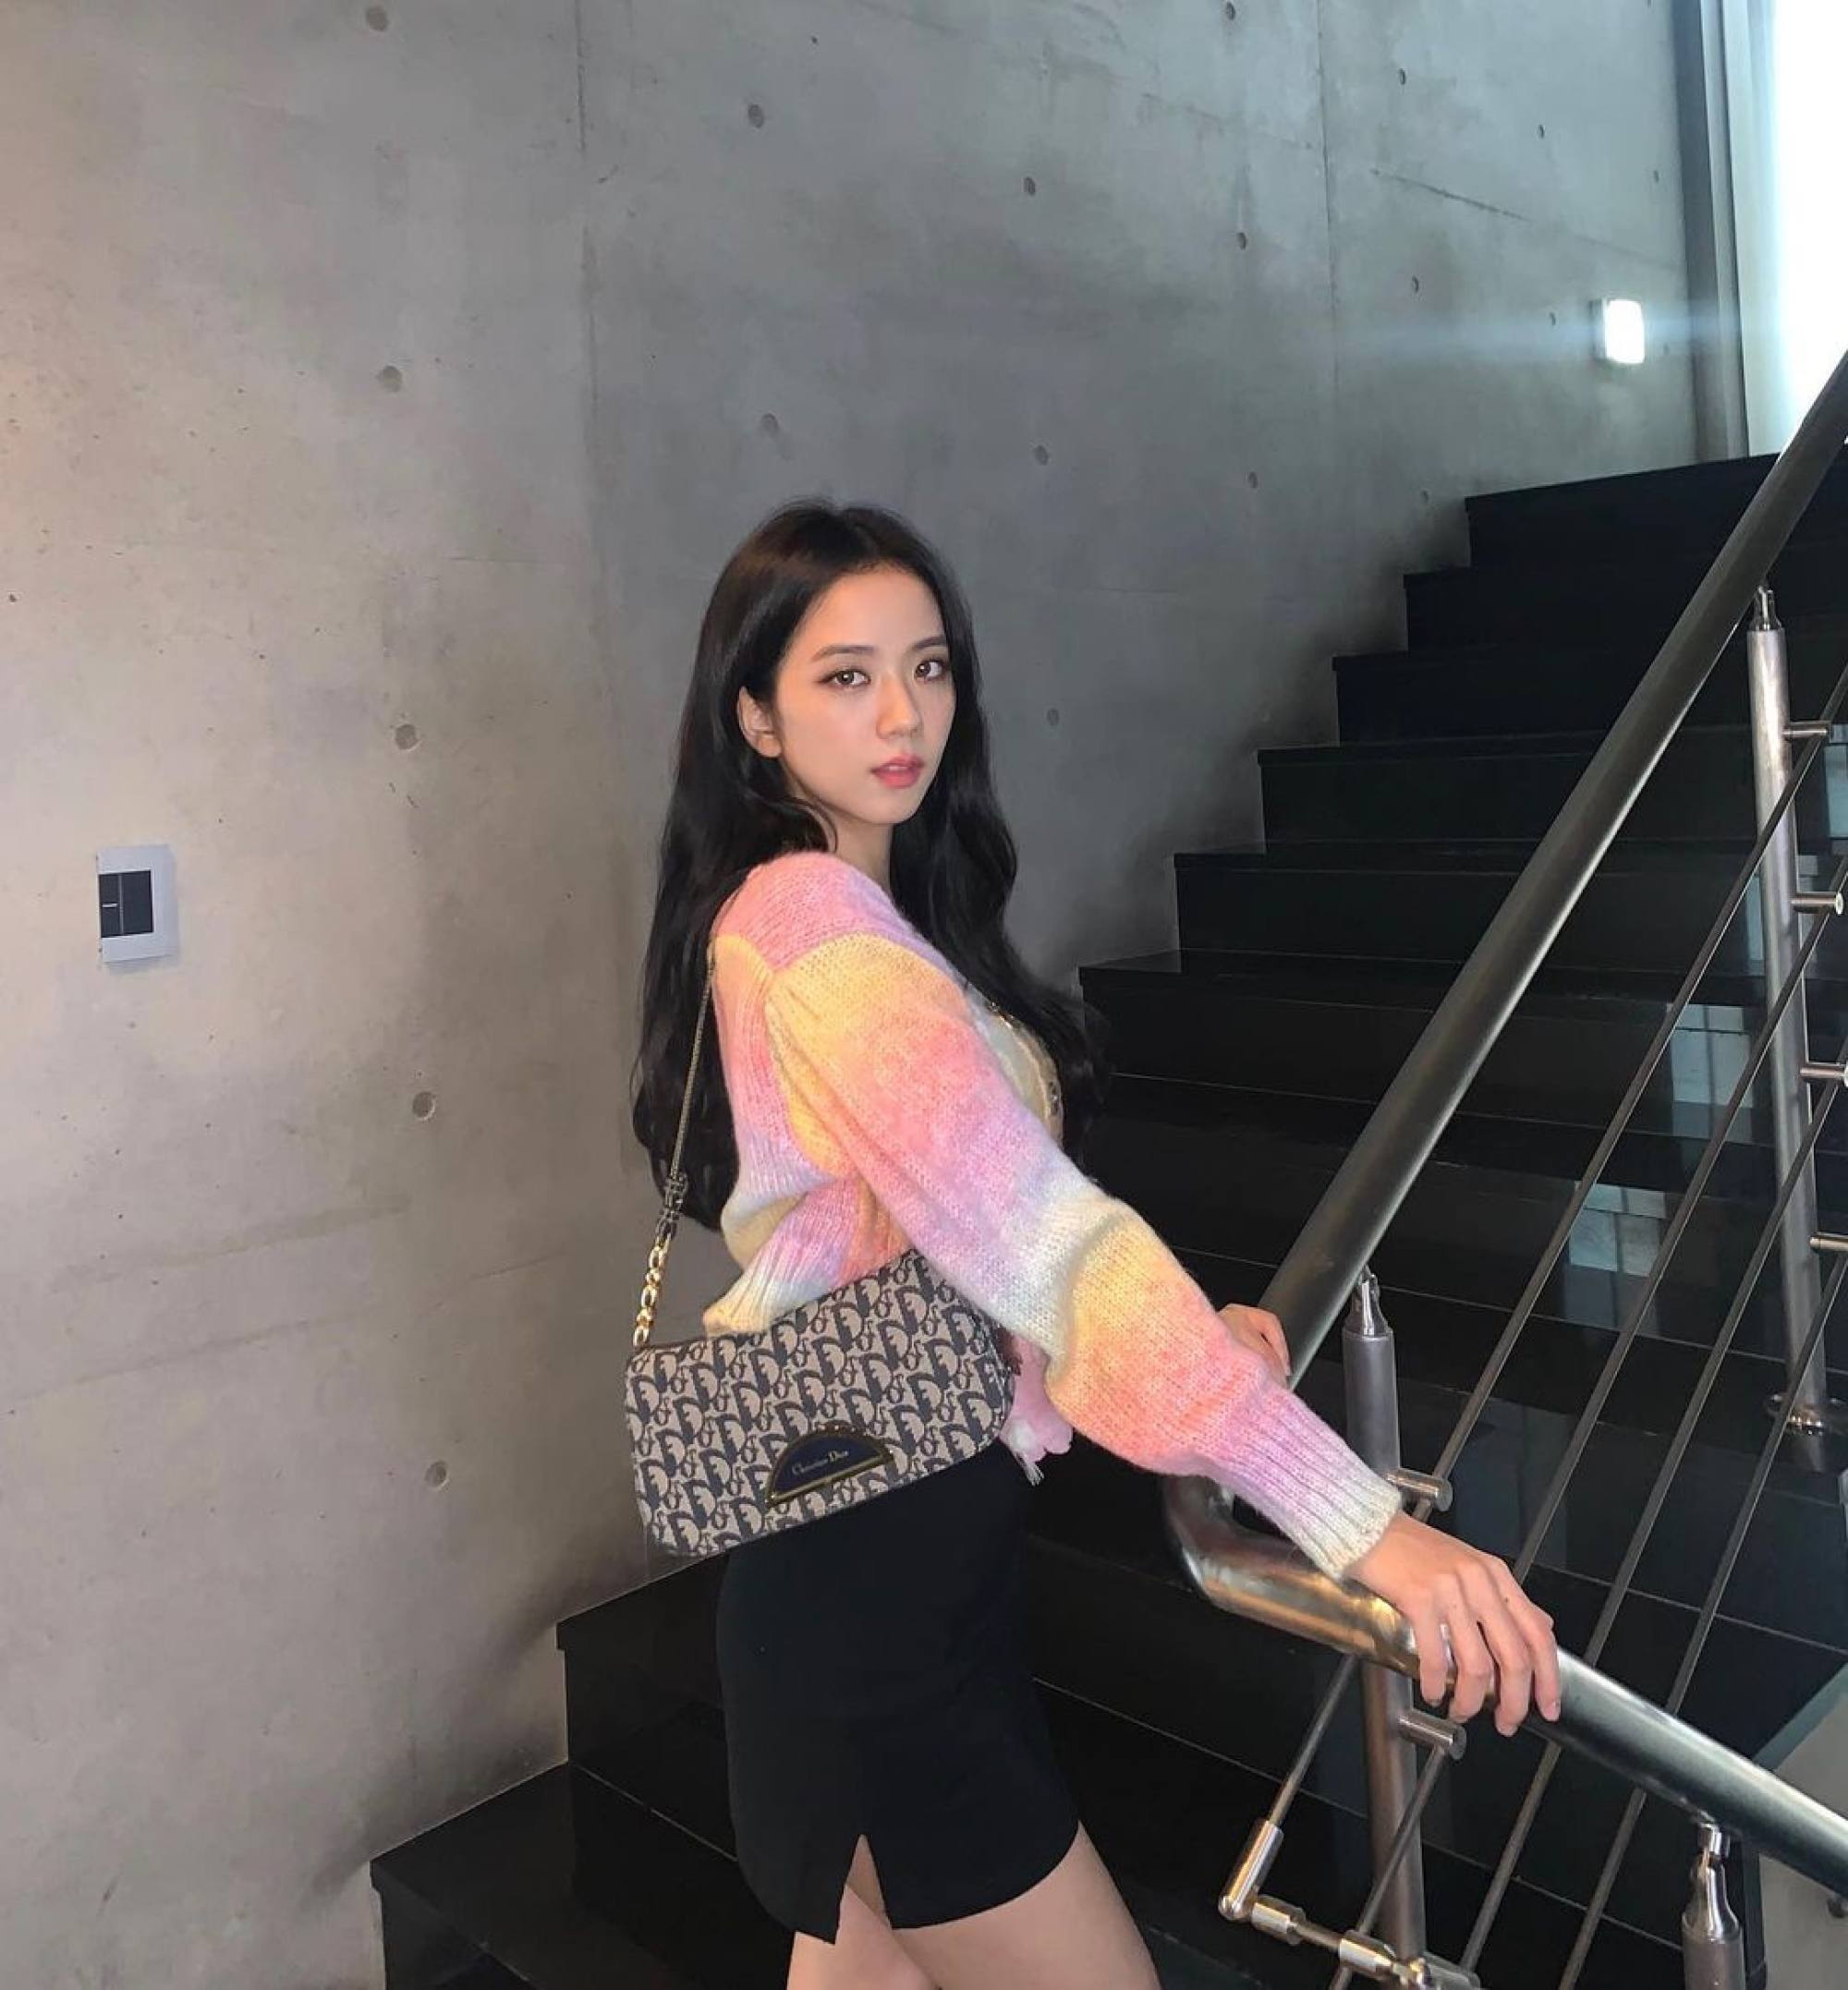 A closer look at Blackpink's Jisoo and her Dior bag collection